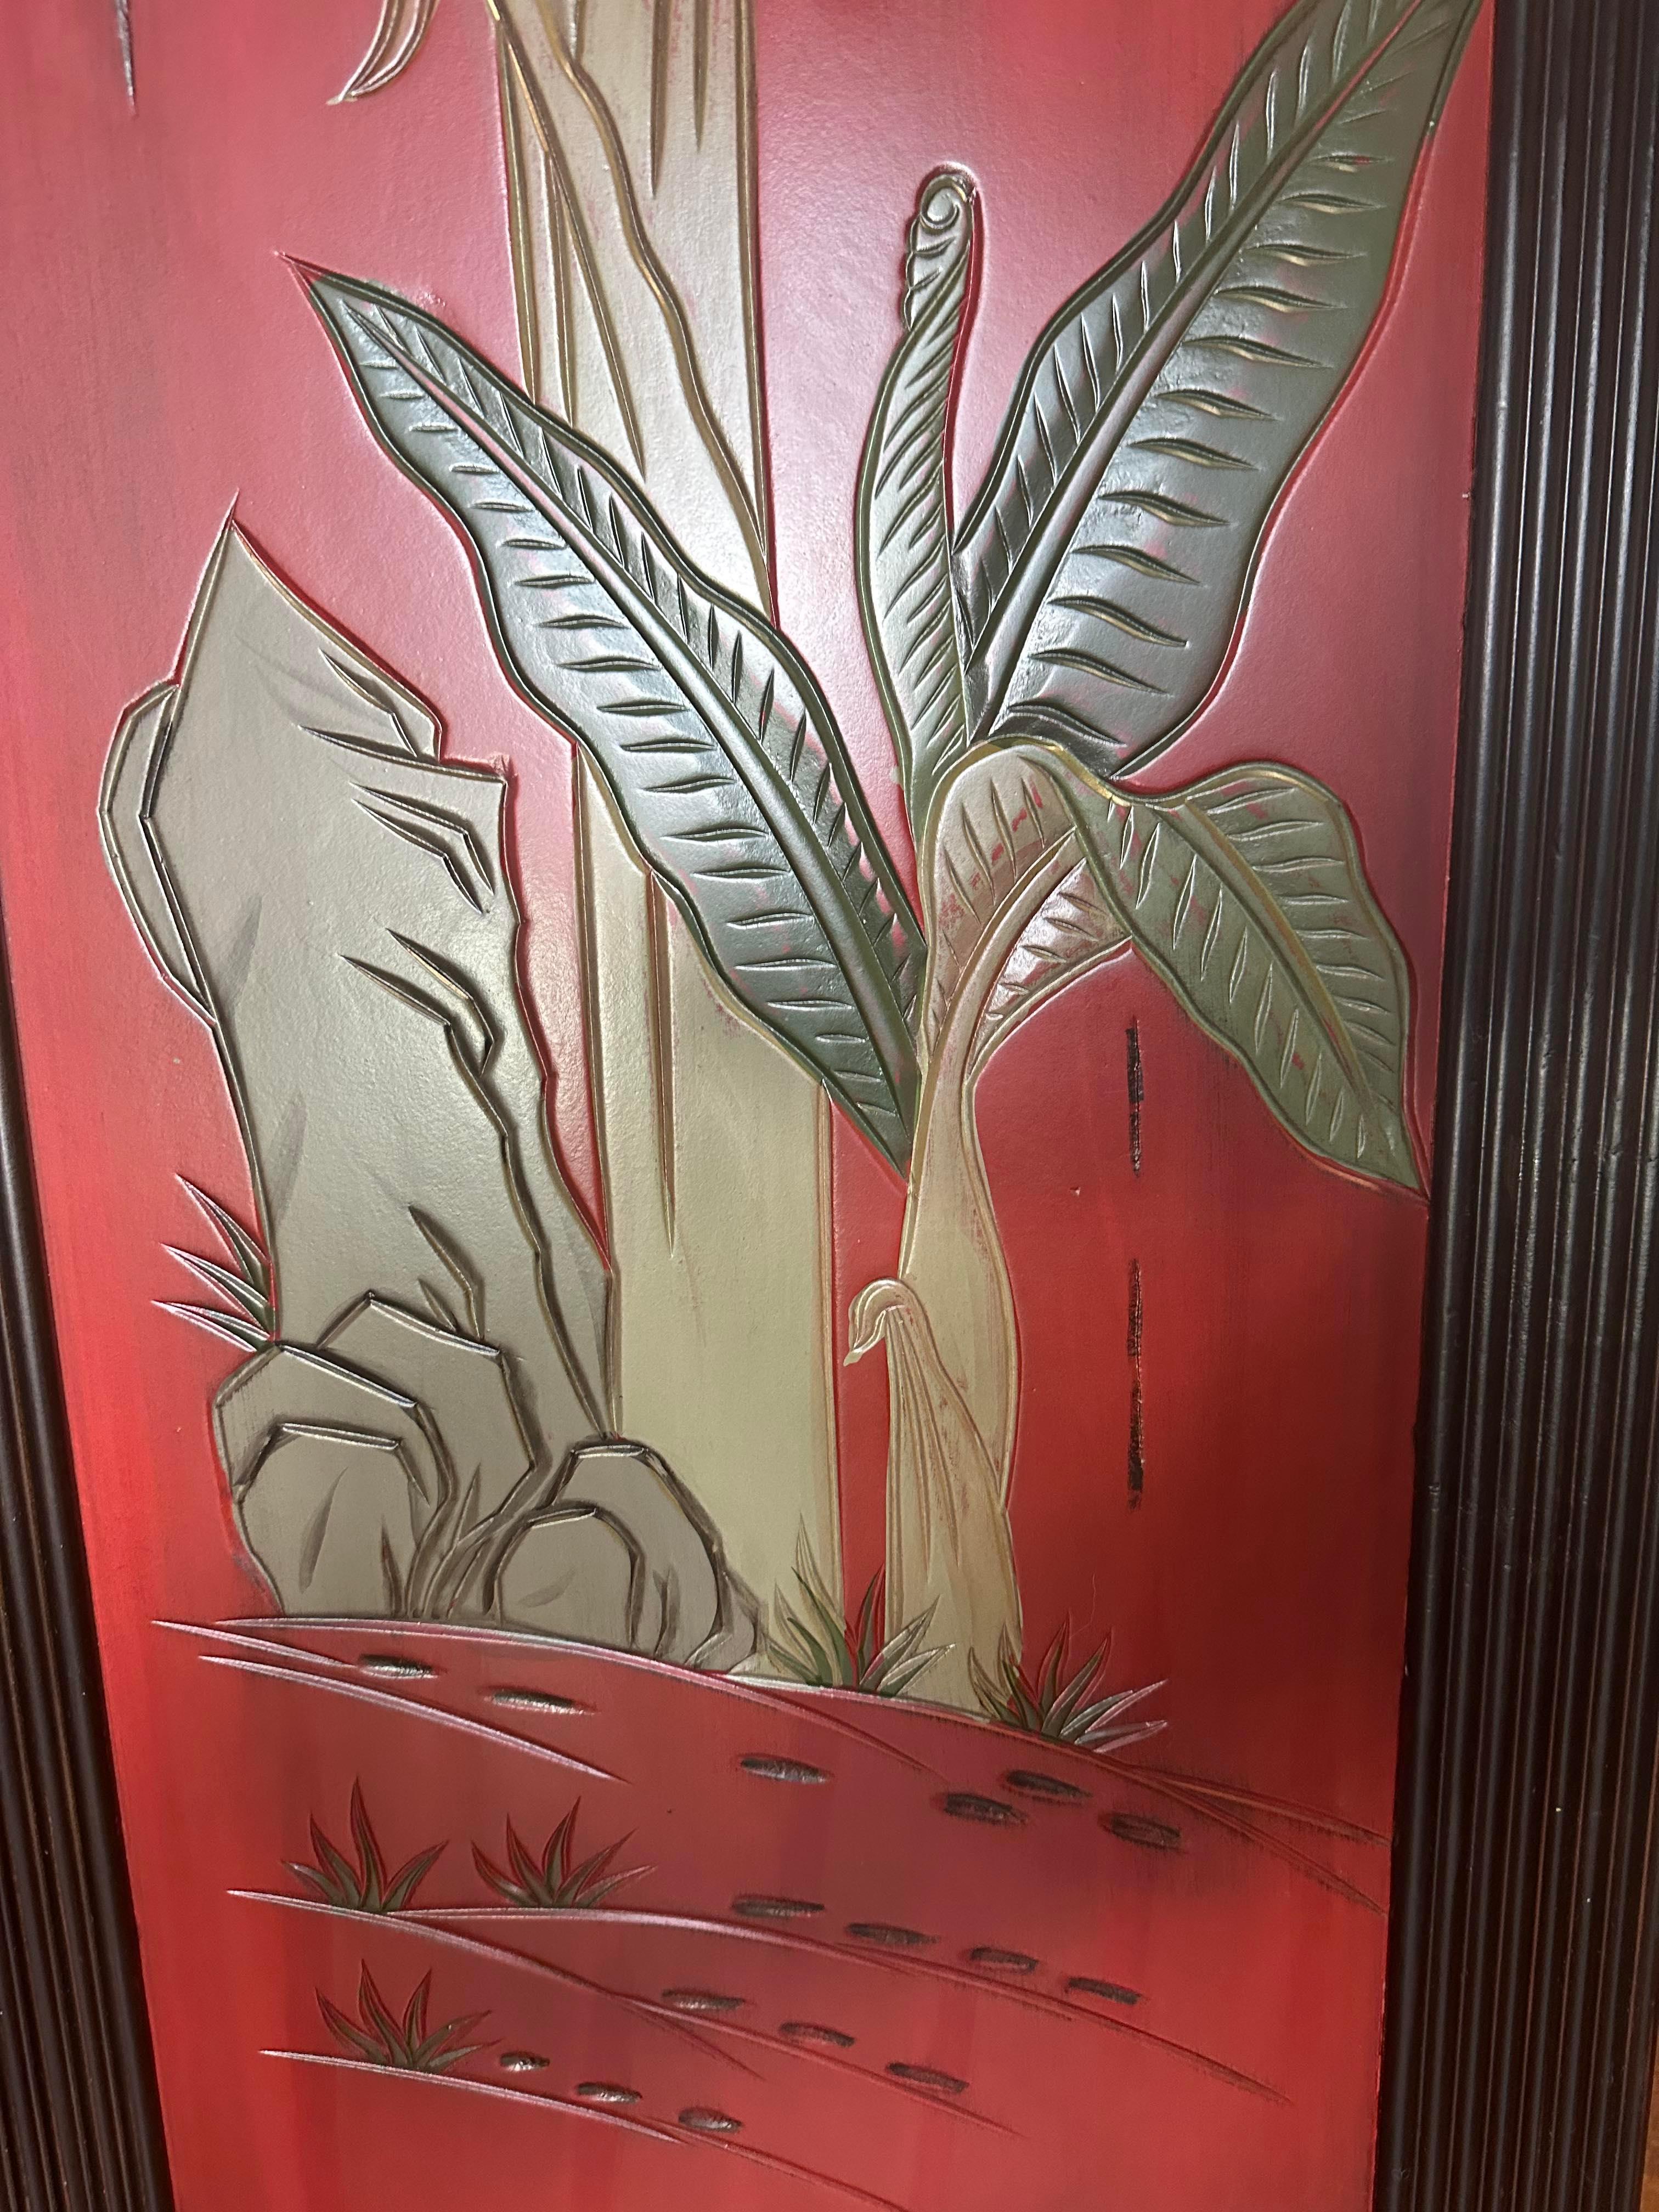 20th century Asian three-panel screen or room
divider in red with palm leaf decoration. 
Striking crimson red will accent any room.
Good vintage condition with age appropriate wear.
Solid, hand carved and hand painted wood. 
Each panel is framed.